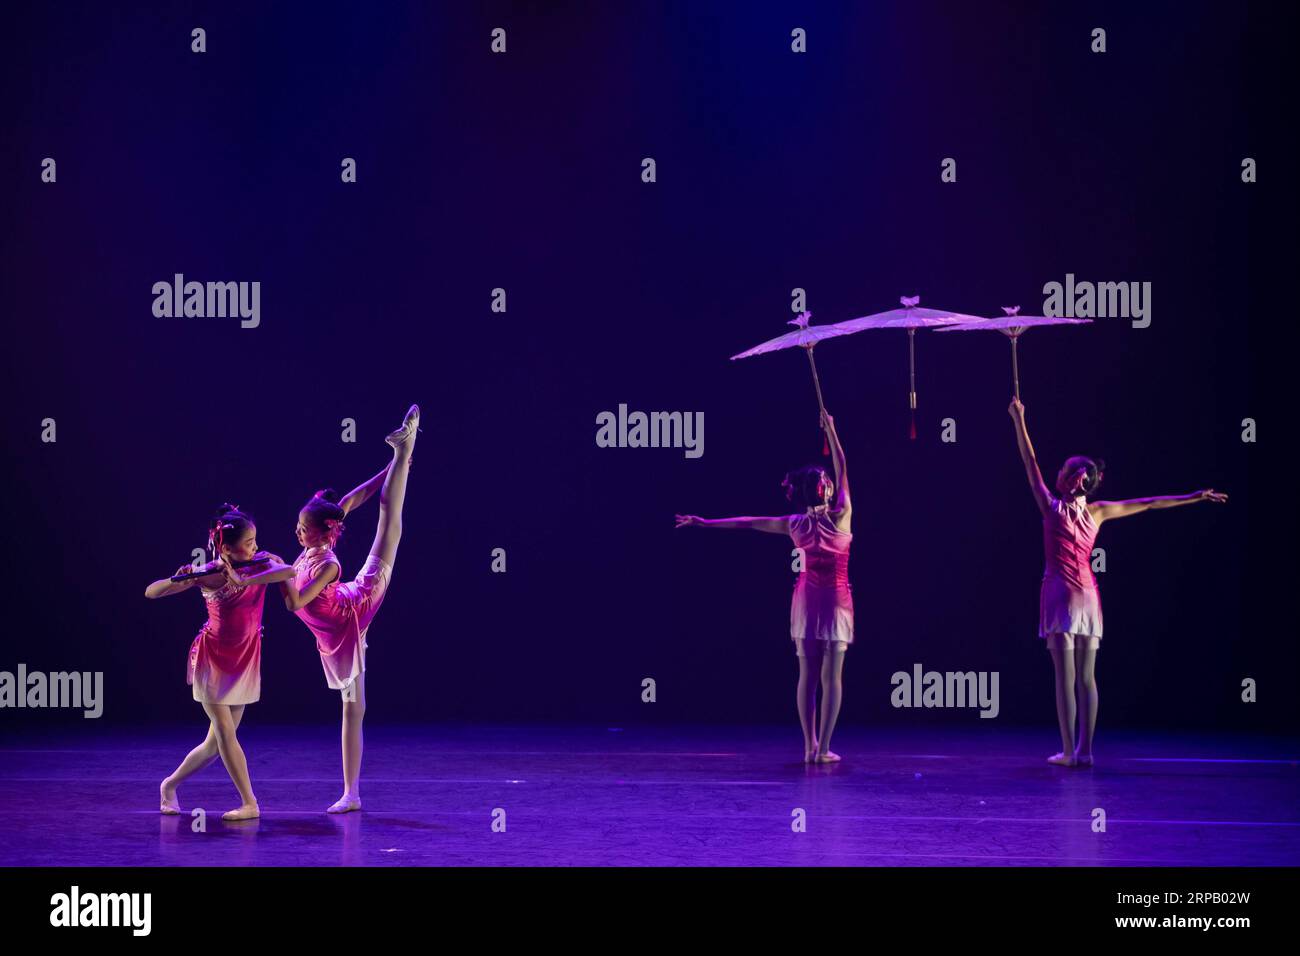 (190523) -- BEIJING, May 23, 2019 (Xinhua) -- Children from the Nanjing Little Red Flower Art Troupe of China perform at the Alexander Theatre in Helsinki, Finland, May 21, 2019. (Xinhua/Matti Matikainen) XINHUA PHOTOS OF THE DAY PUBLICATIONxNOTxINxCHN Stock Photo